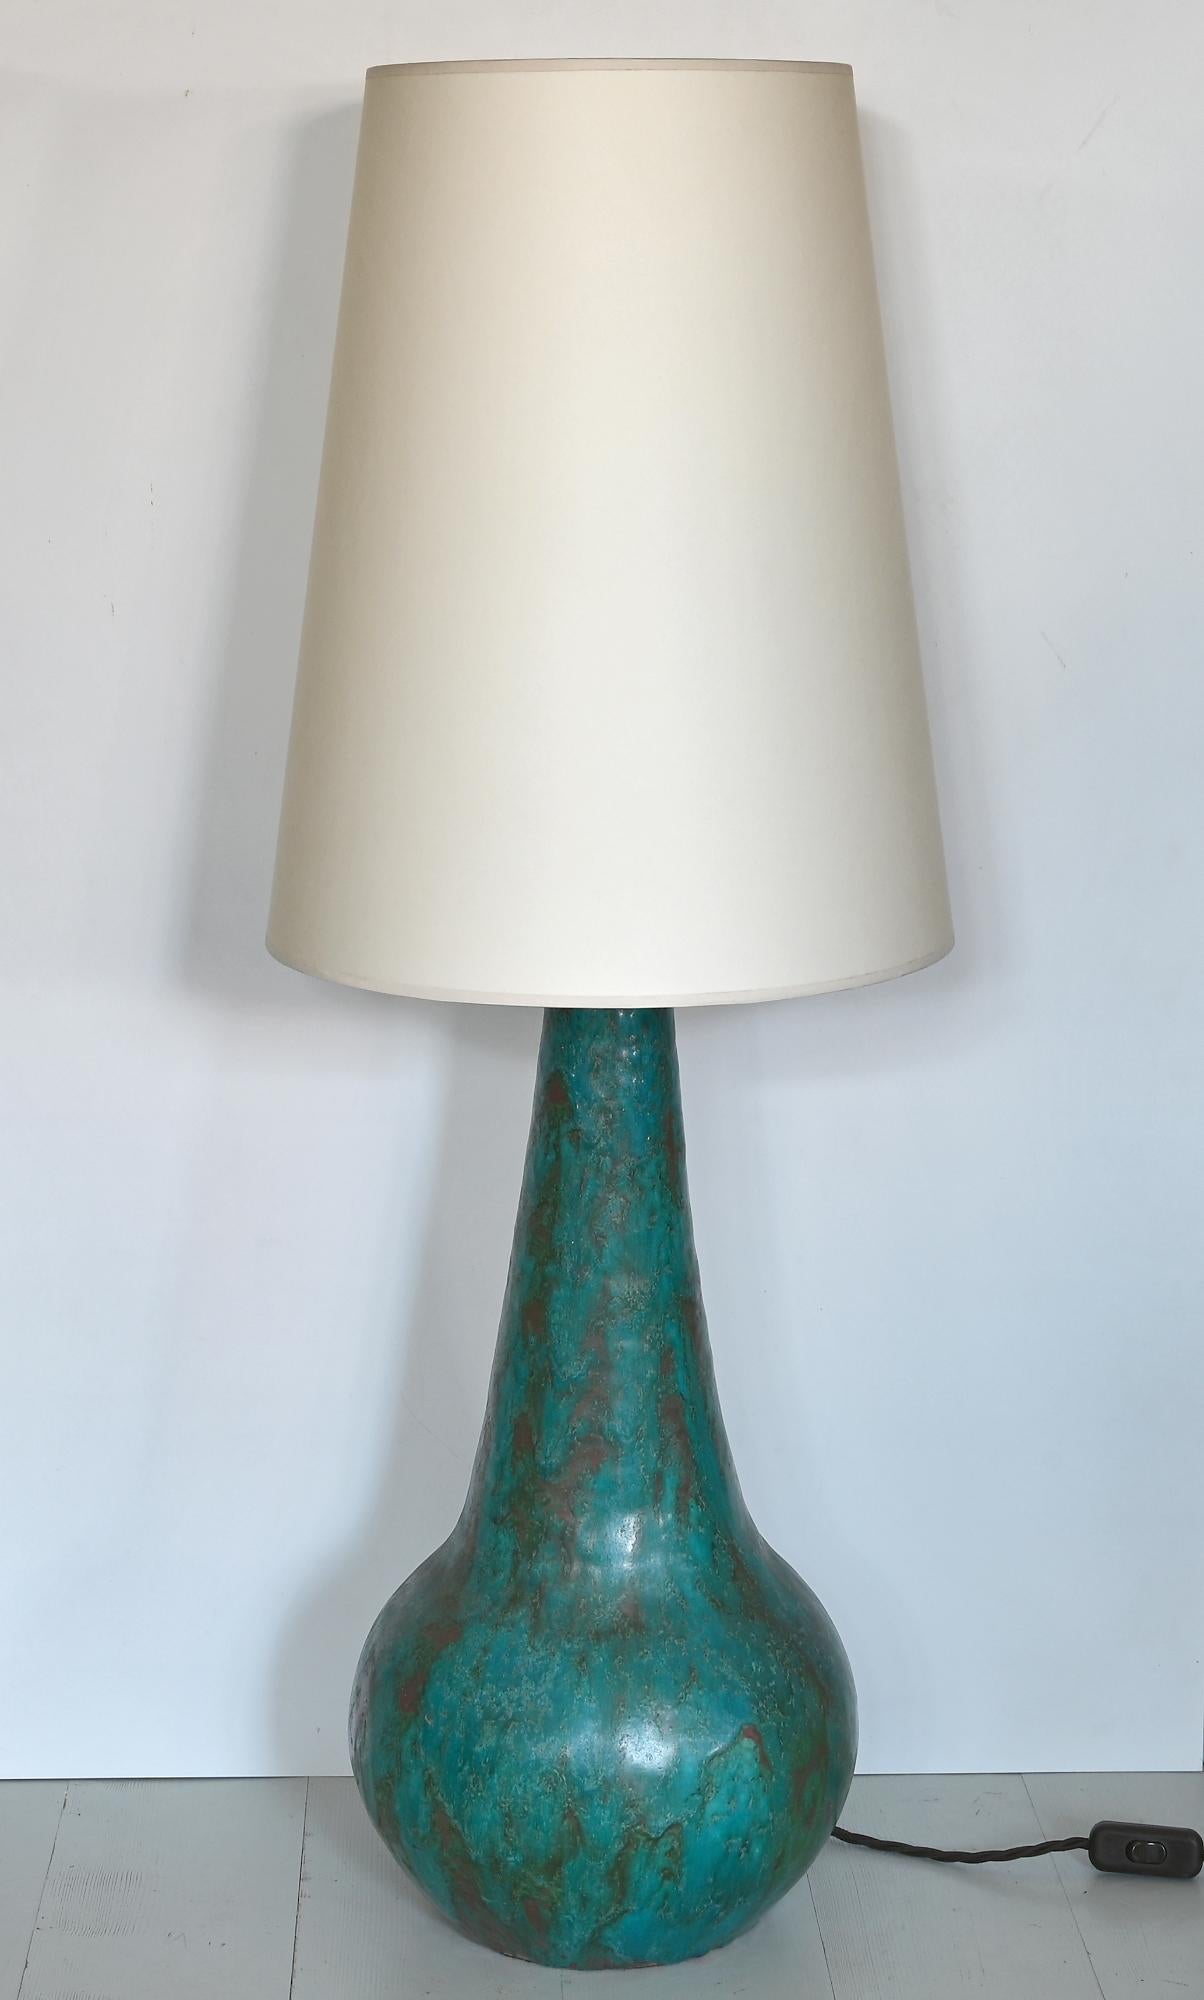 A beautiful handcrafted pottery table lamp with beautiful blue tones and some copper tones which give a special appearance and surface.
The height can be adjusted. The electrics are up to date, the cable is a brown fabric cable.
The screen is